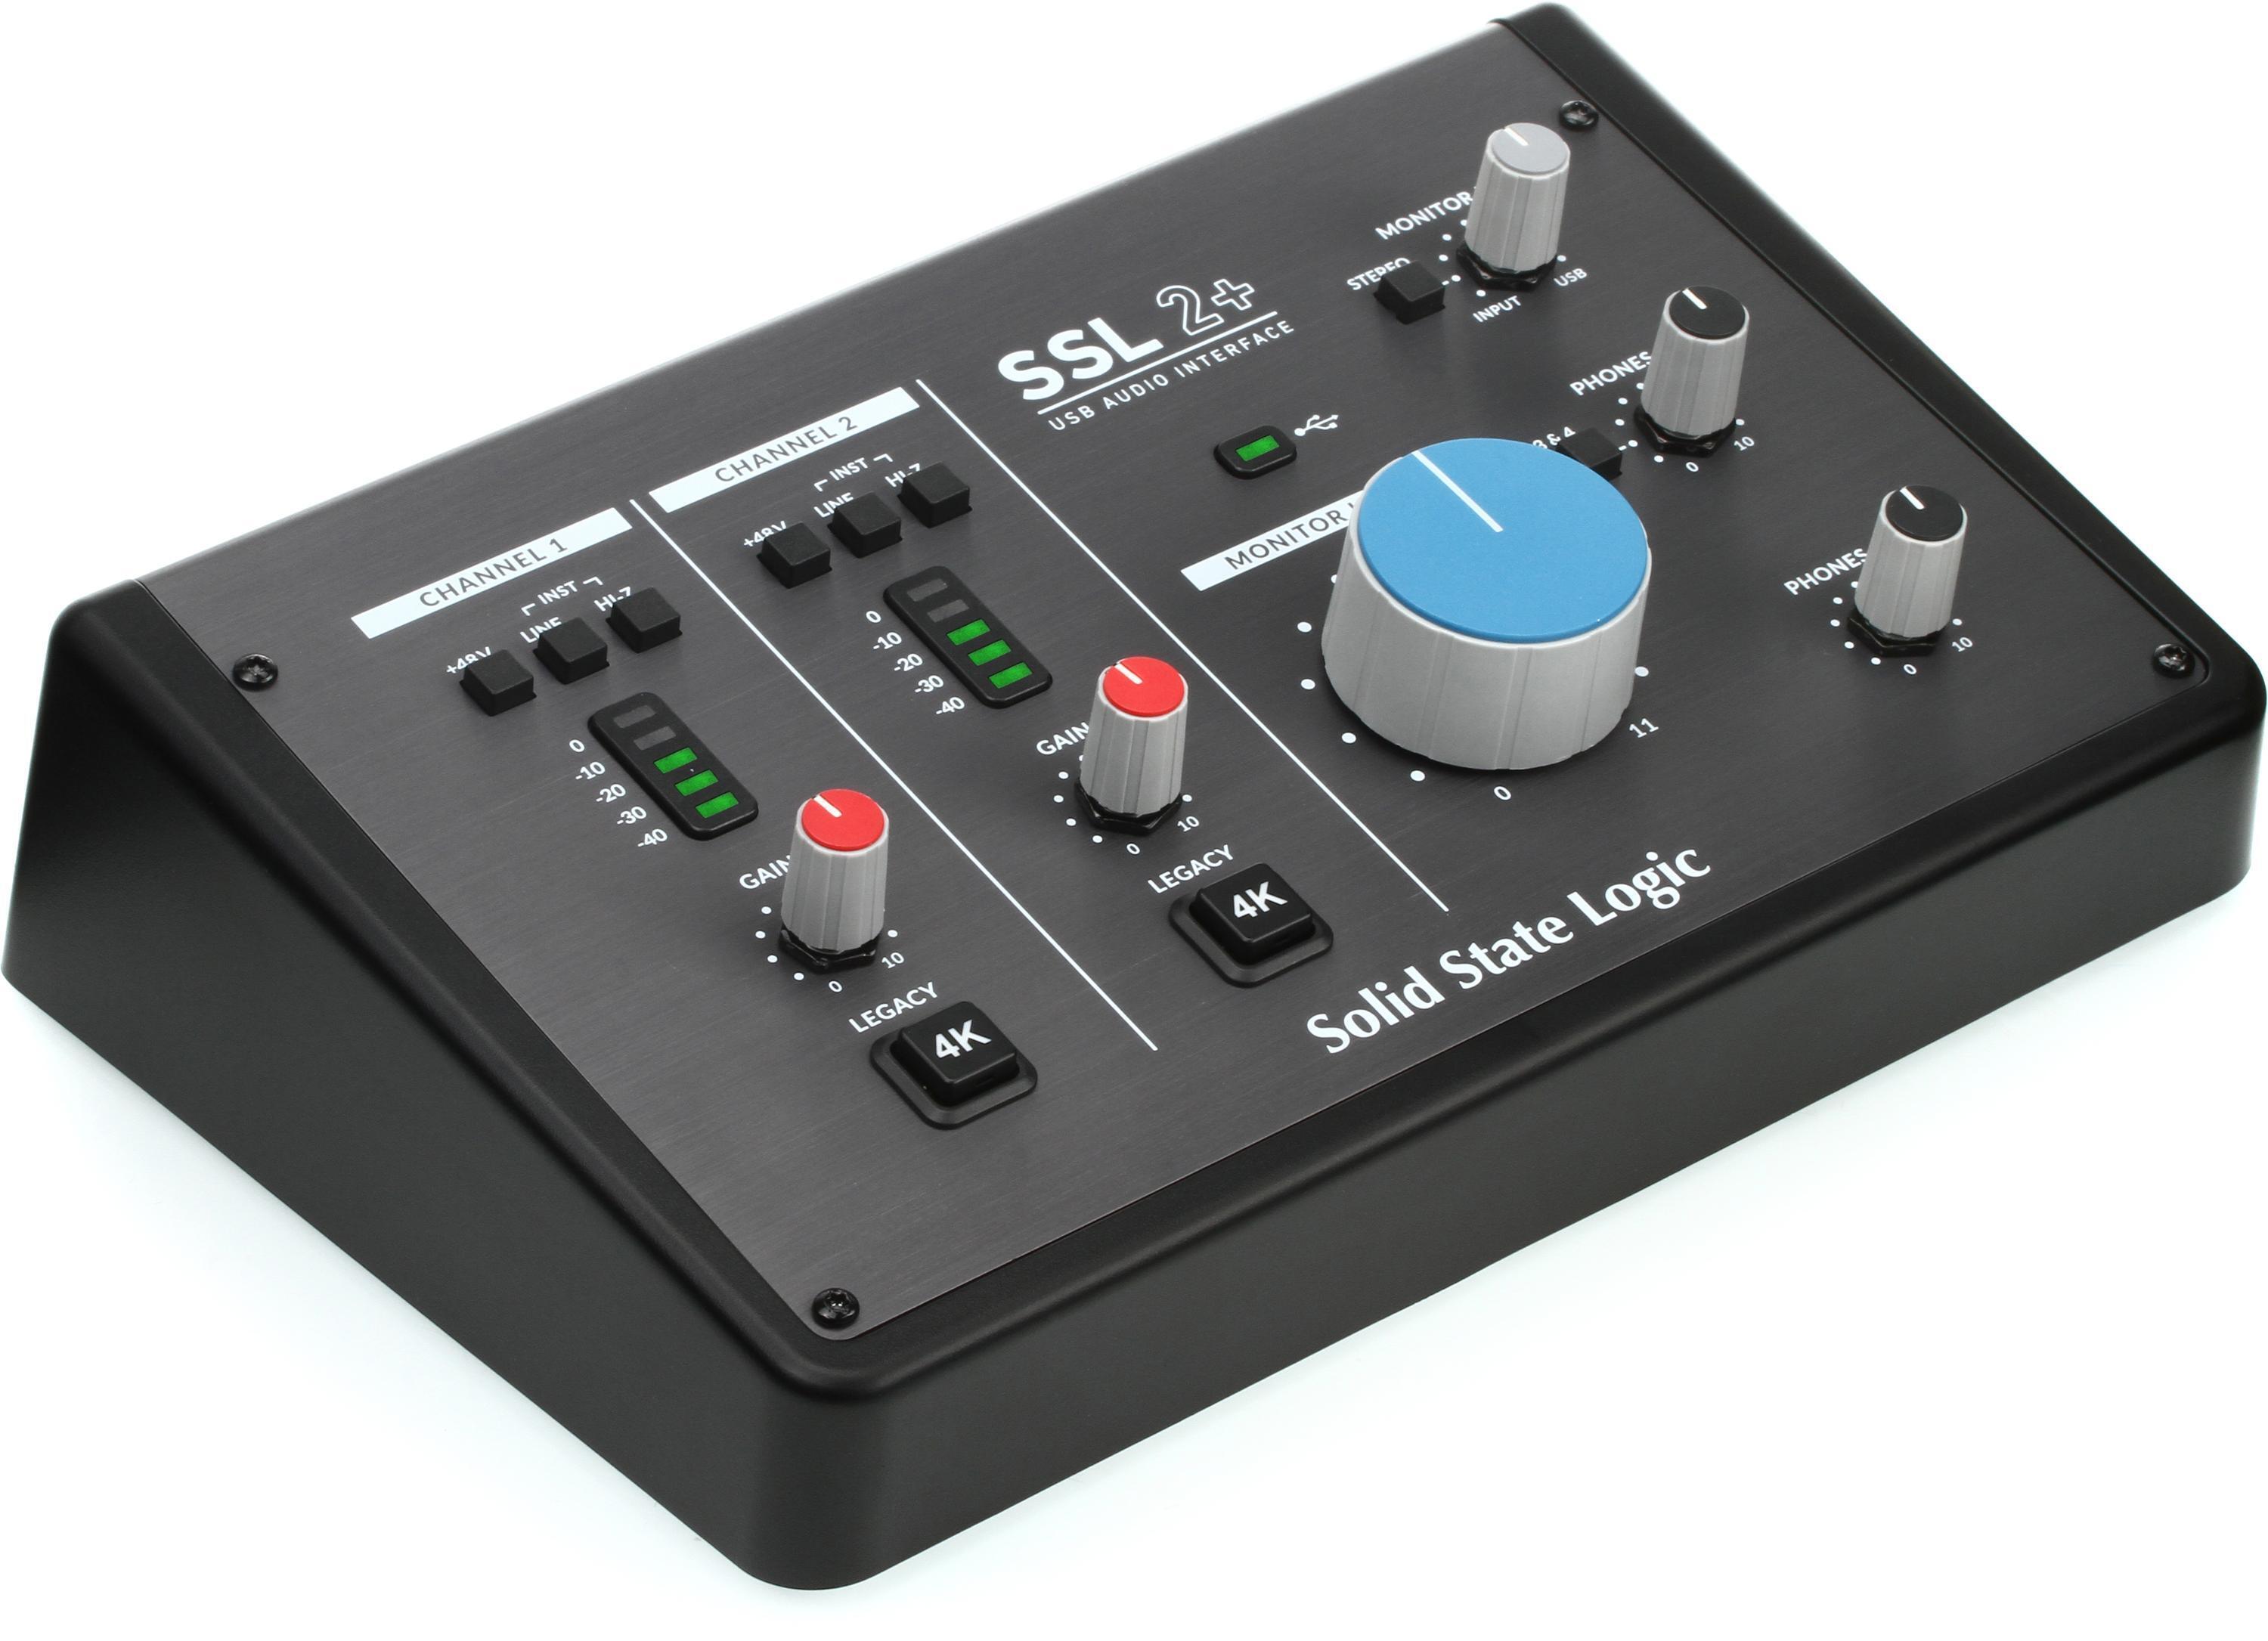 Solid State Logic SSL 12 USB Audio Interface | Sweetwater